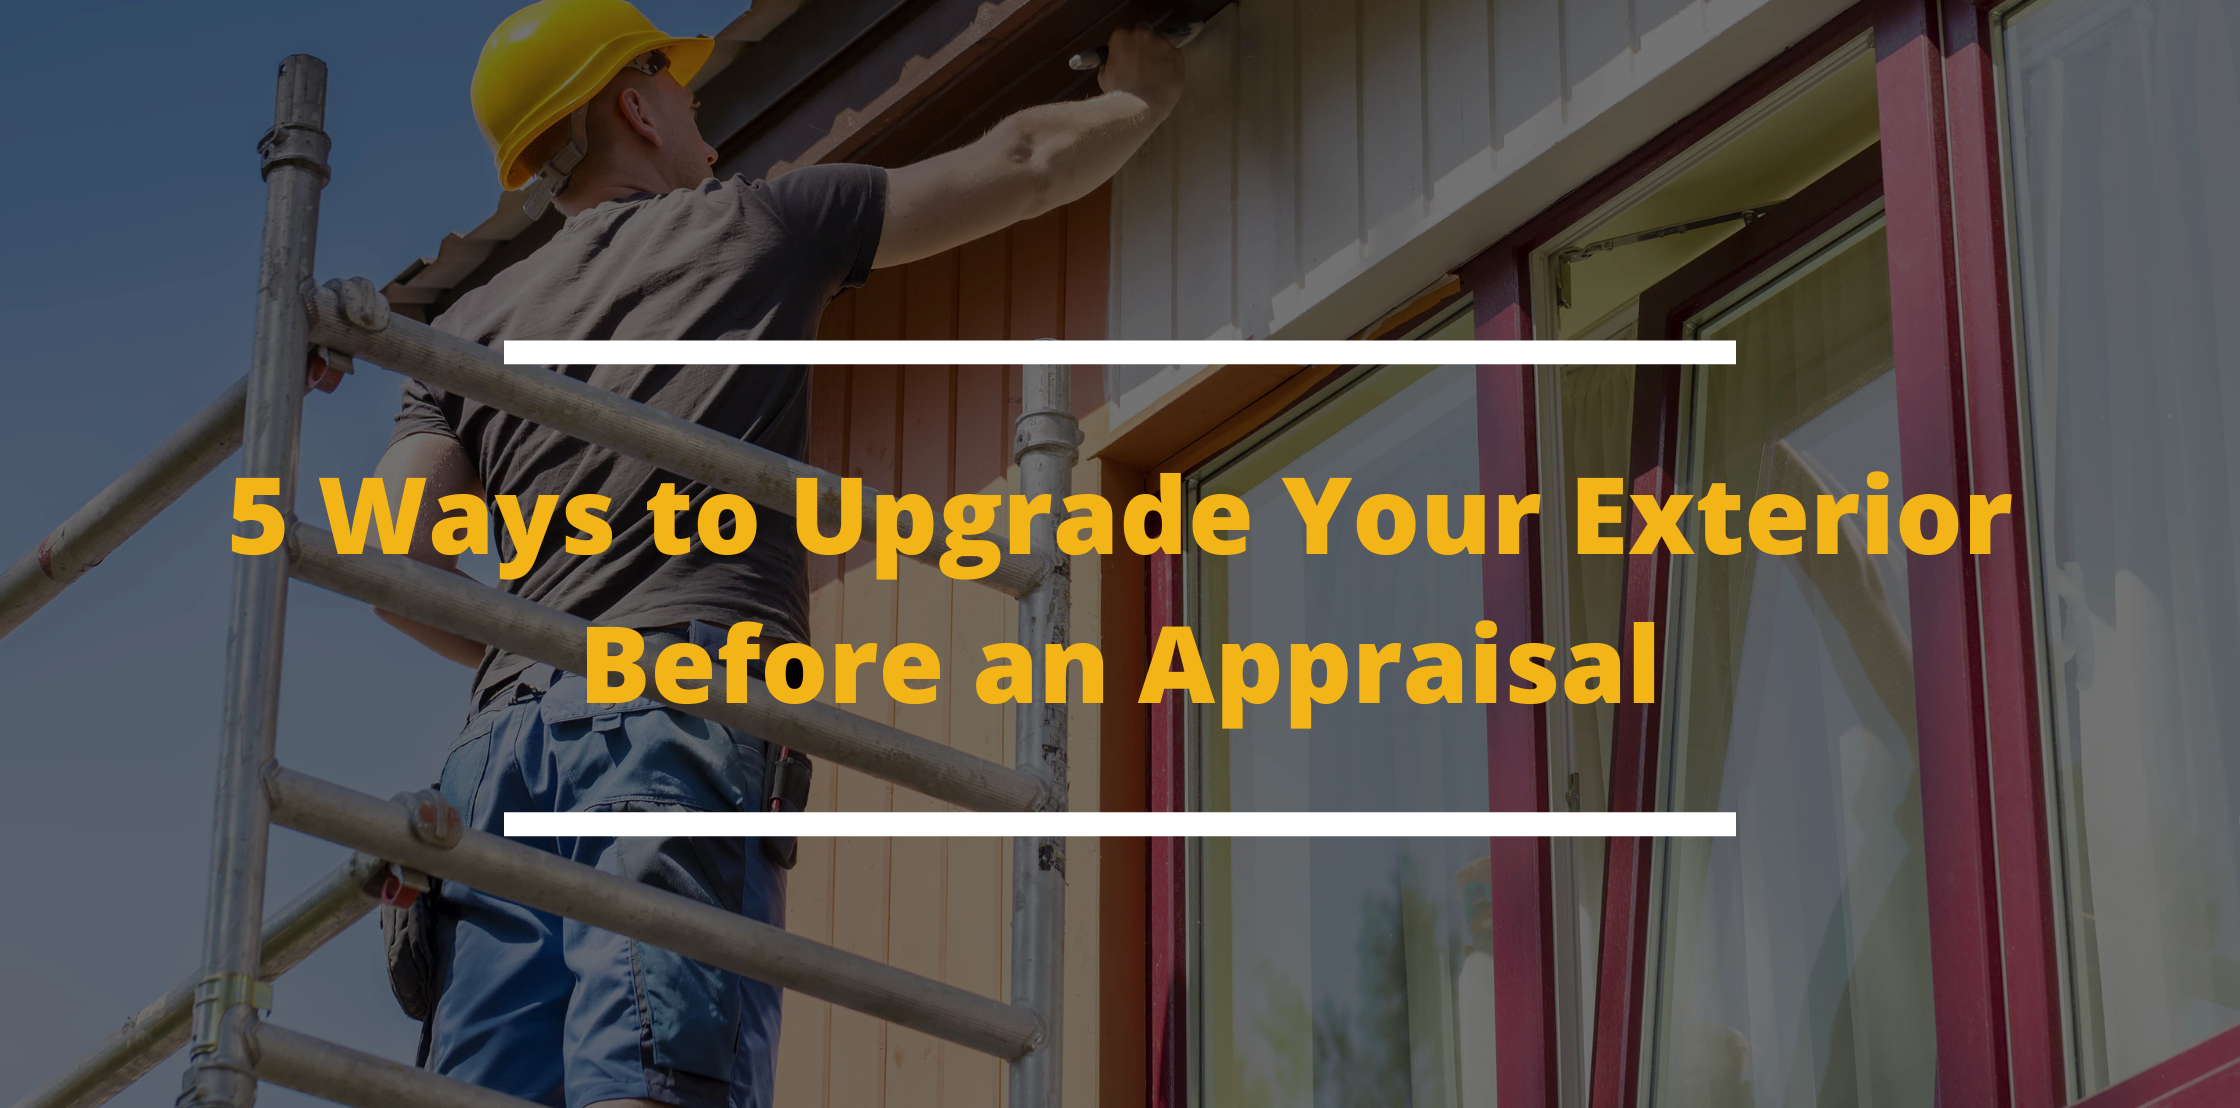 5 Ways to Upgrade Your Exterior Before an Appraisal